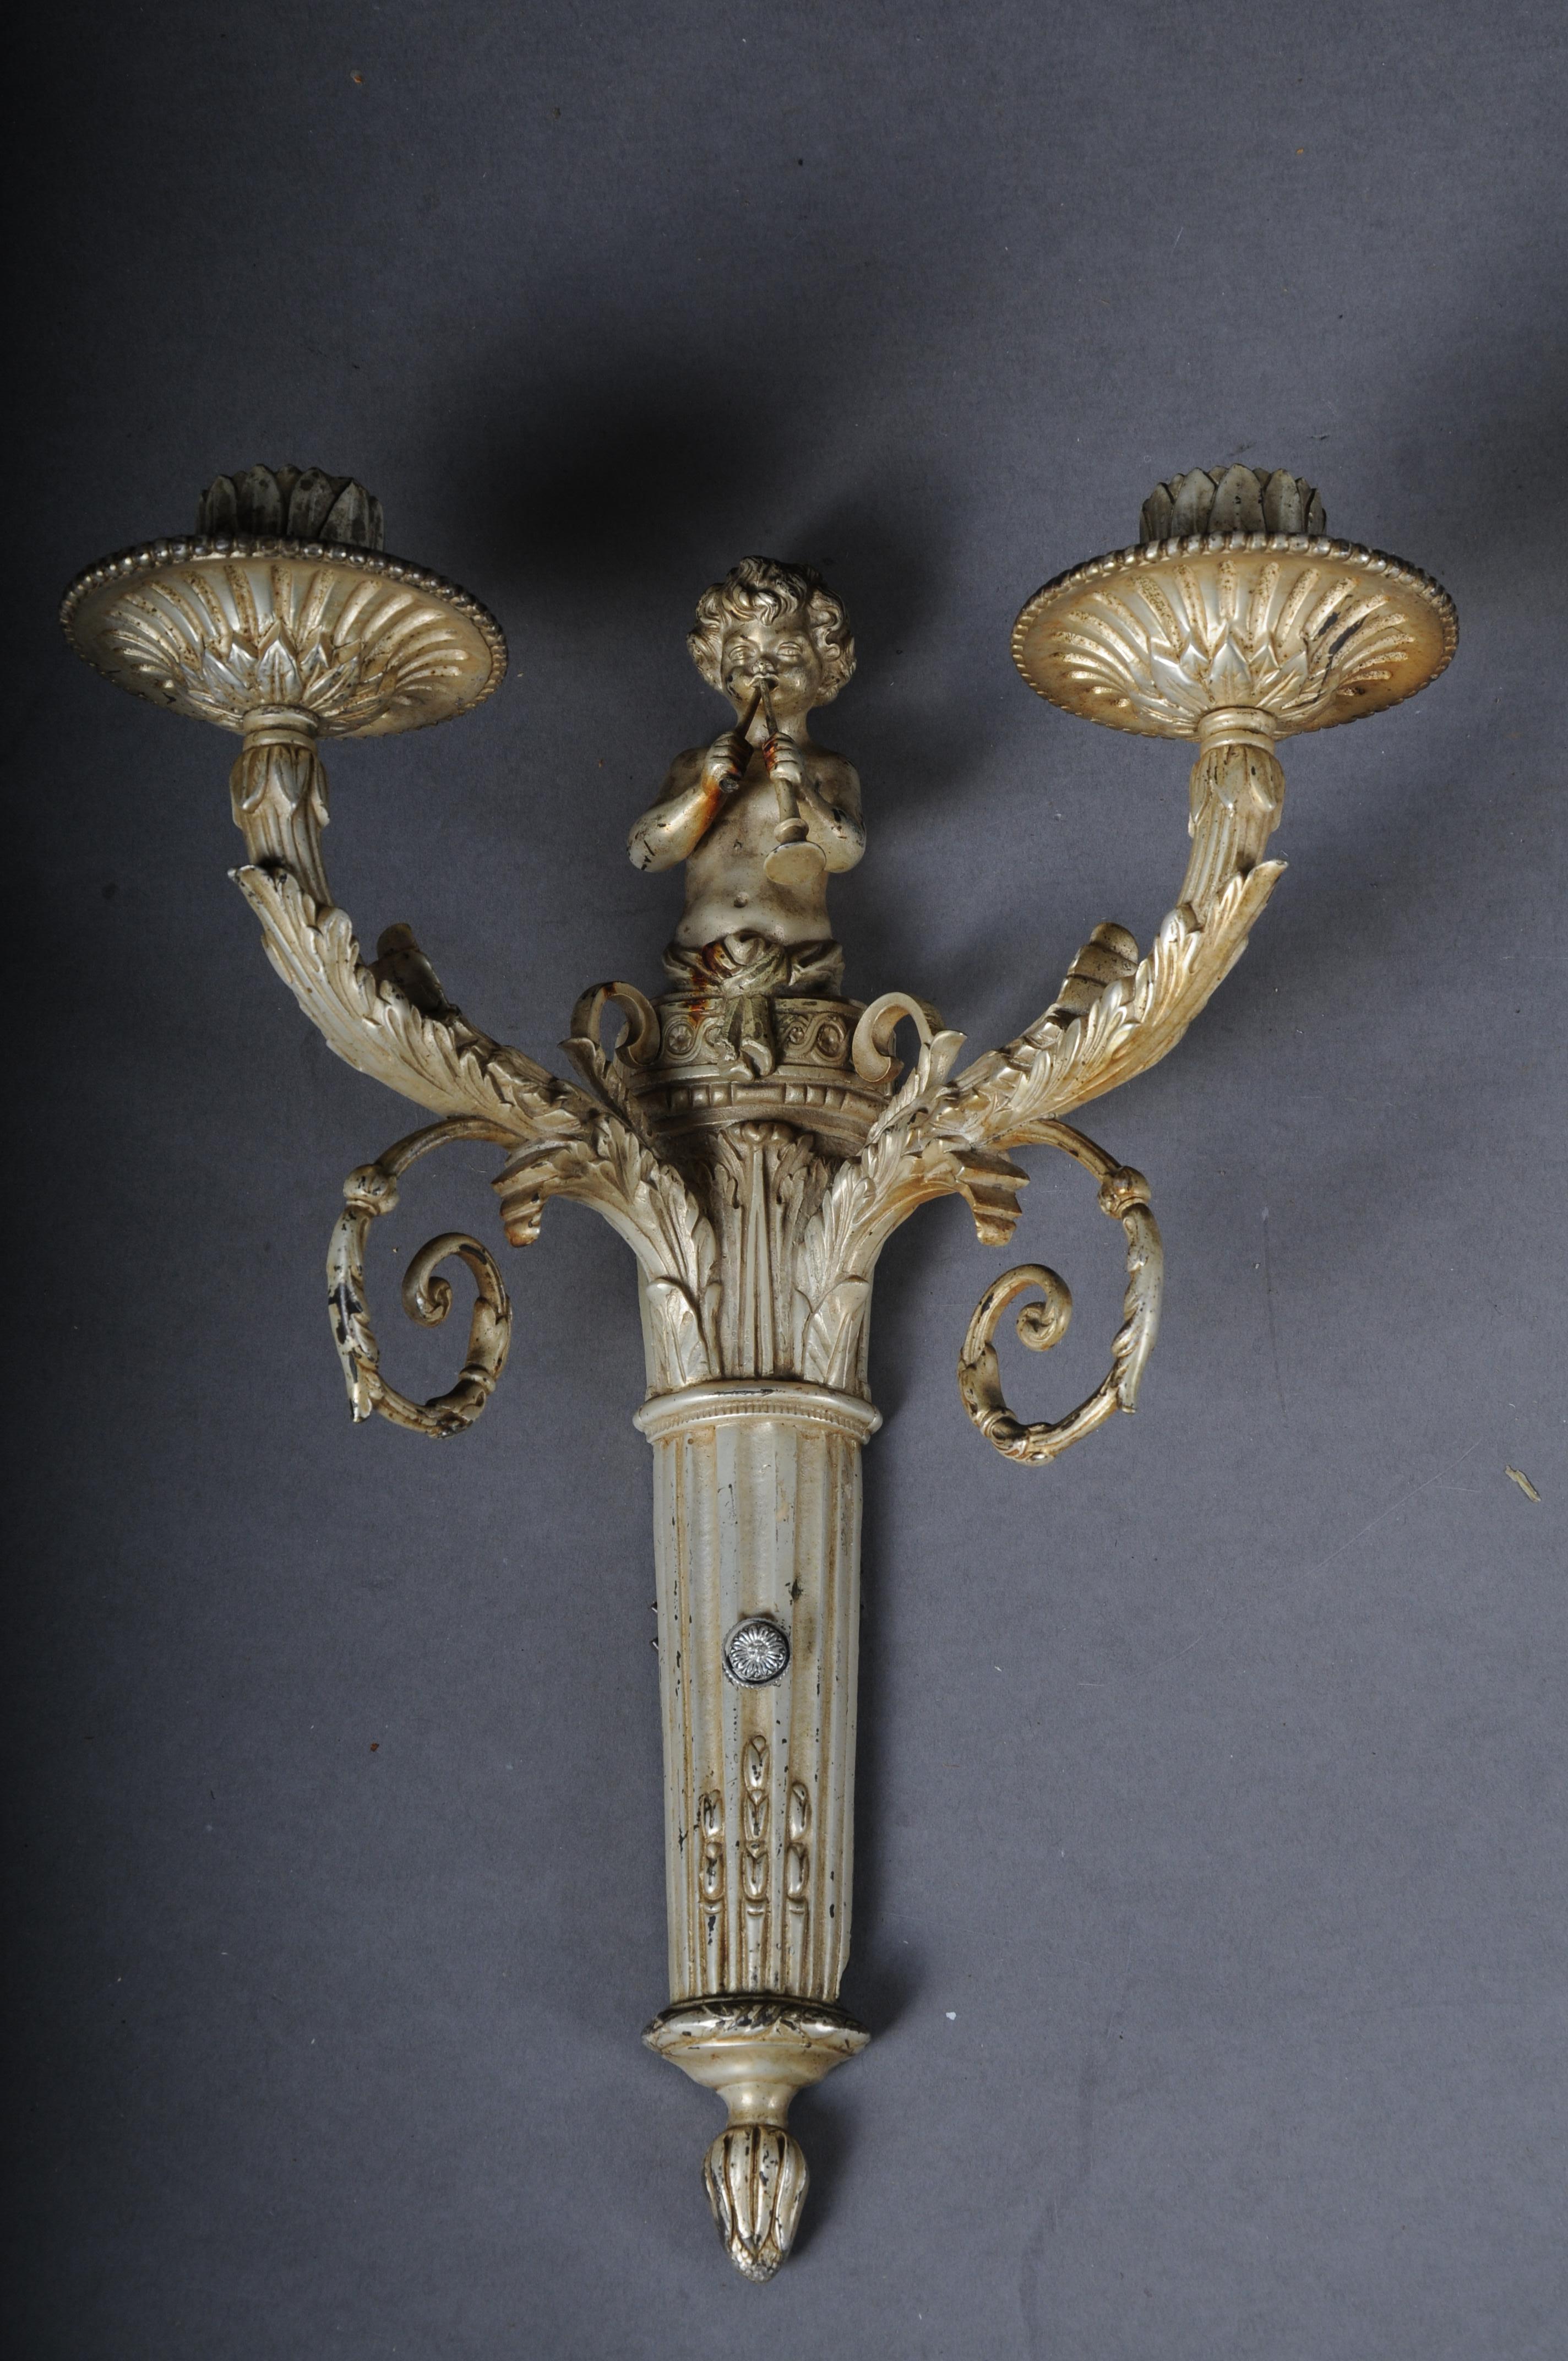 Beautiful antique bronze candle sconce from around 1880, France

Bronze, ornate and ornate, articulated with two luminous arms. If desired, the candlestick can be wired/electrified.